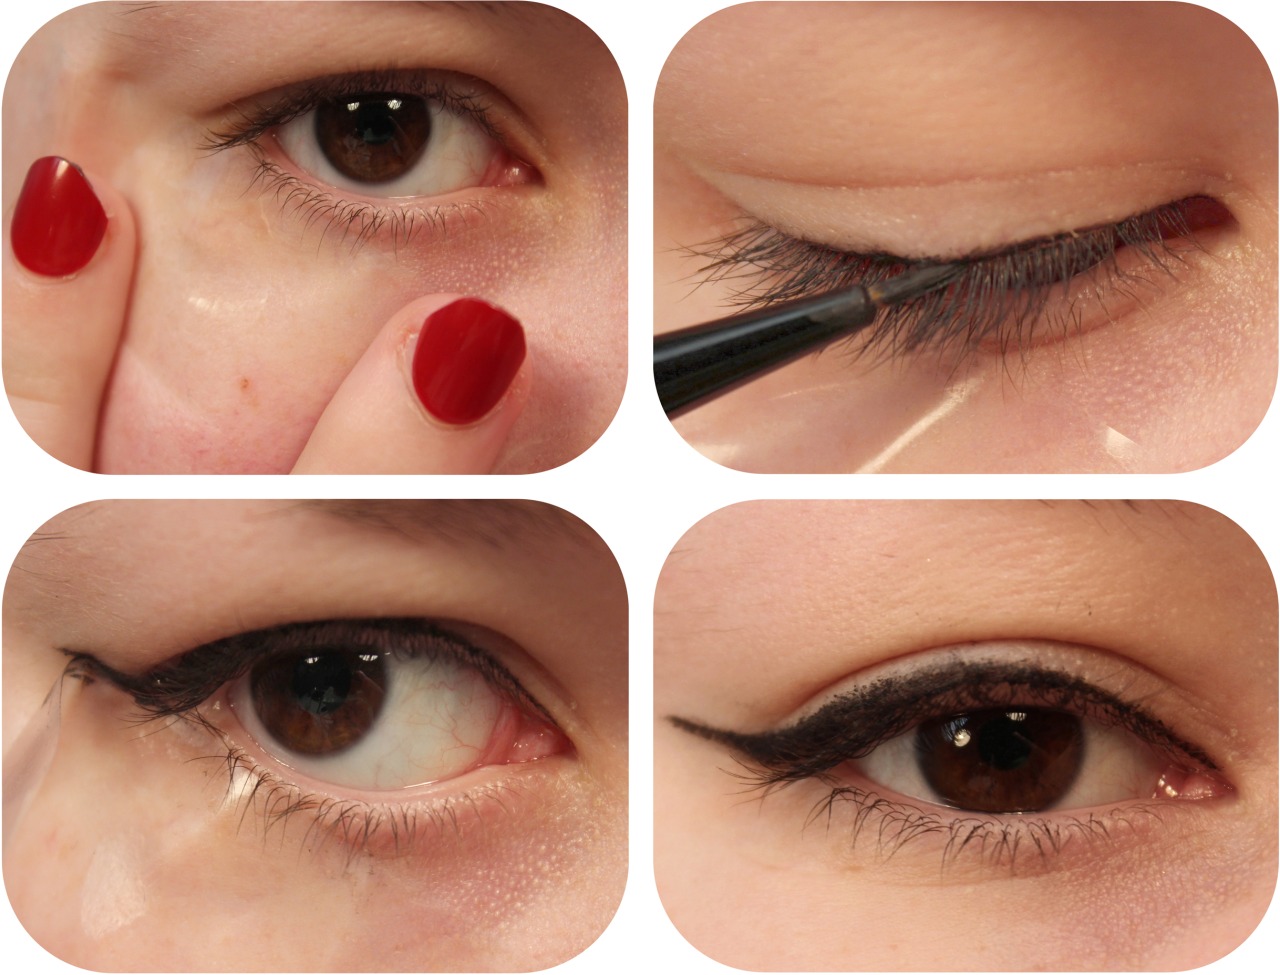 
Use Sticky Tape to Create a Perfect Line!
Picture this: you try to create a perfect cat eye but struggle to get both sides even and instead end up with a bumpy, uneven line. Well sticky tape can help! It can provide a stencil for your eyeliner meaning you get a perfect even line every time!
Make sure to remove the stick from the tape before you use it! Place the sticky tape on the back of your hand and remove it a couple of times to prevent it from damaging skin around the eyes.
Step 1. Find where your eyebrow ends and gently smooth the sticky tape on an angle pointing up to it (make sure to place it underneath your lashes)
Step 2. Apply eyeliner to your upper lash line and wing it out using the sticky tape as a guide. Make sure to fill in any gaps and go over the line a few times to build up intensity
Step 3. Gently remove the sticky tape
Step 4. Done!

Instagram | Twitter | Pinterest | Newsletter | Youtube
*Please view Makeup Tips disclosure policies regarding information and products mentioned on this blog.